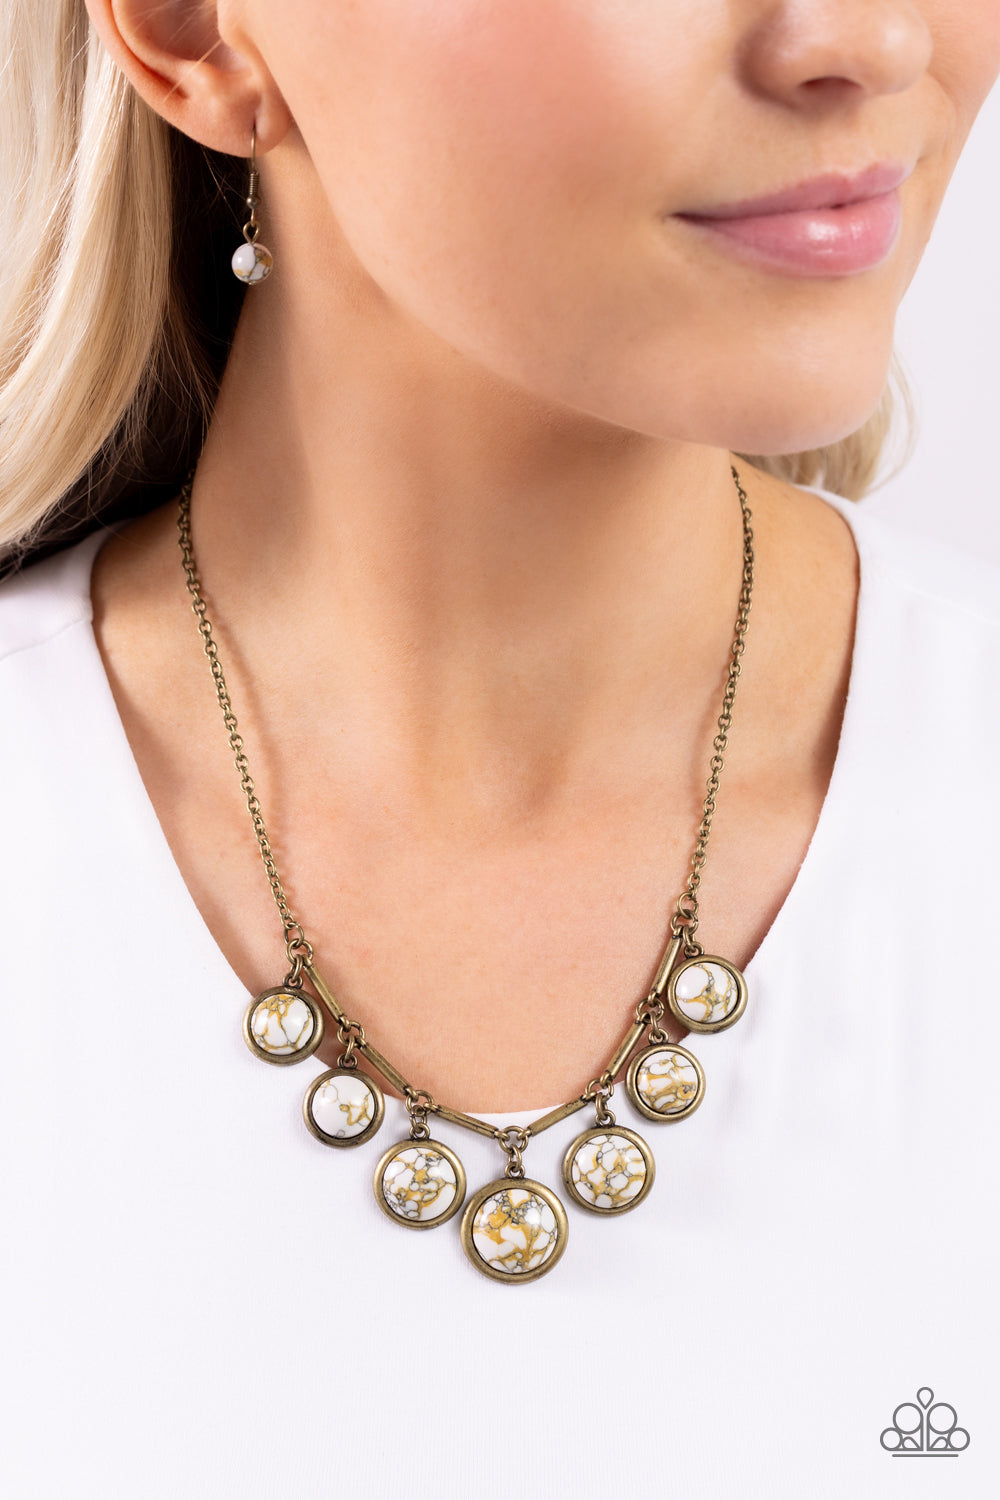 Rustic Recognition - Brass Frames/White Marbled Stones Paparazzi Necklace & matching earrings